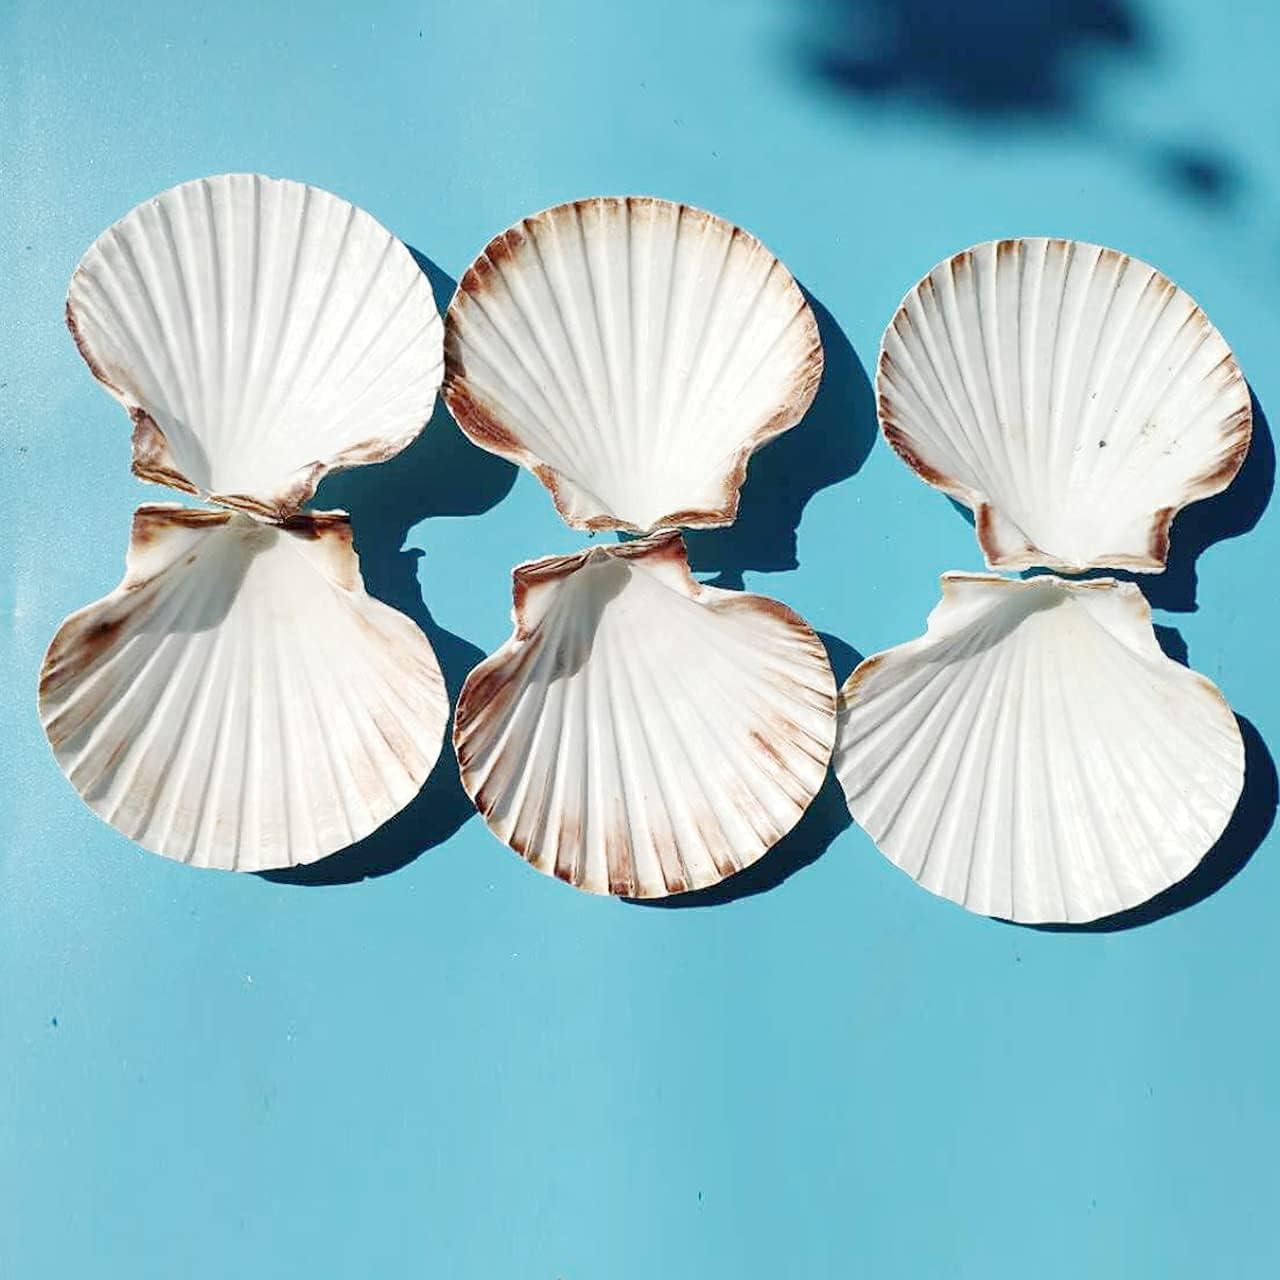 Giftvest 10pcs Sea Shells White Scallop Shells for Crafts Baking Cooking Serving Food, 4-5 inch Large Natural Seashells for DIY Crafts Seashell Beach